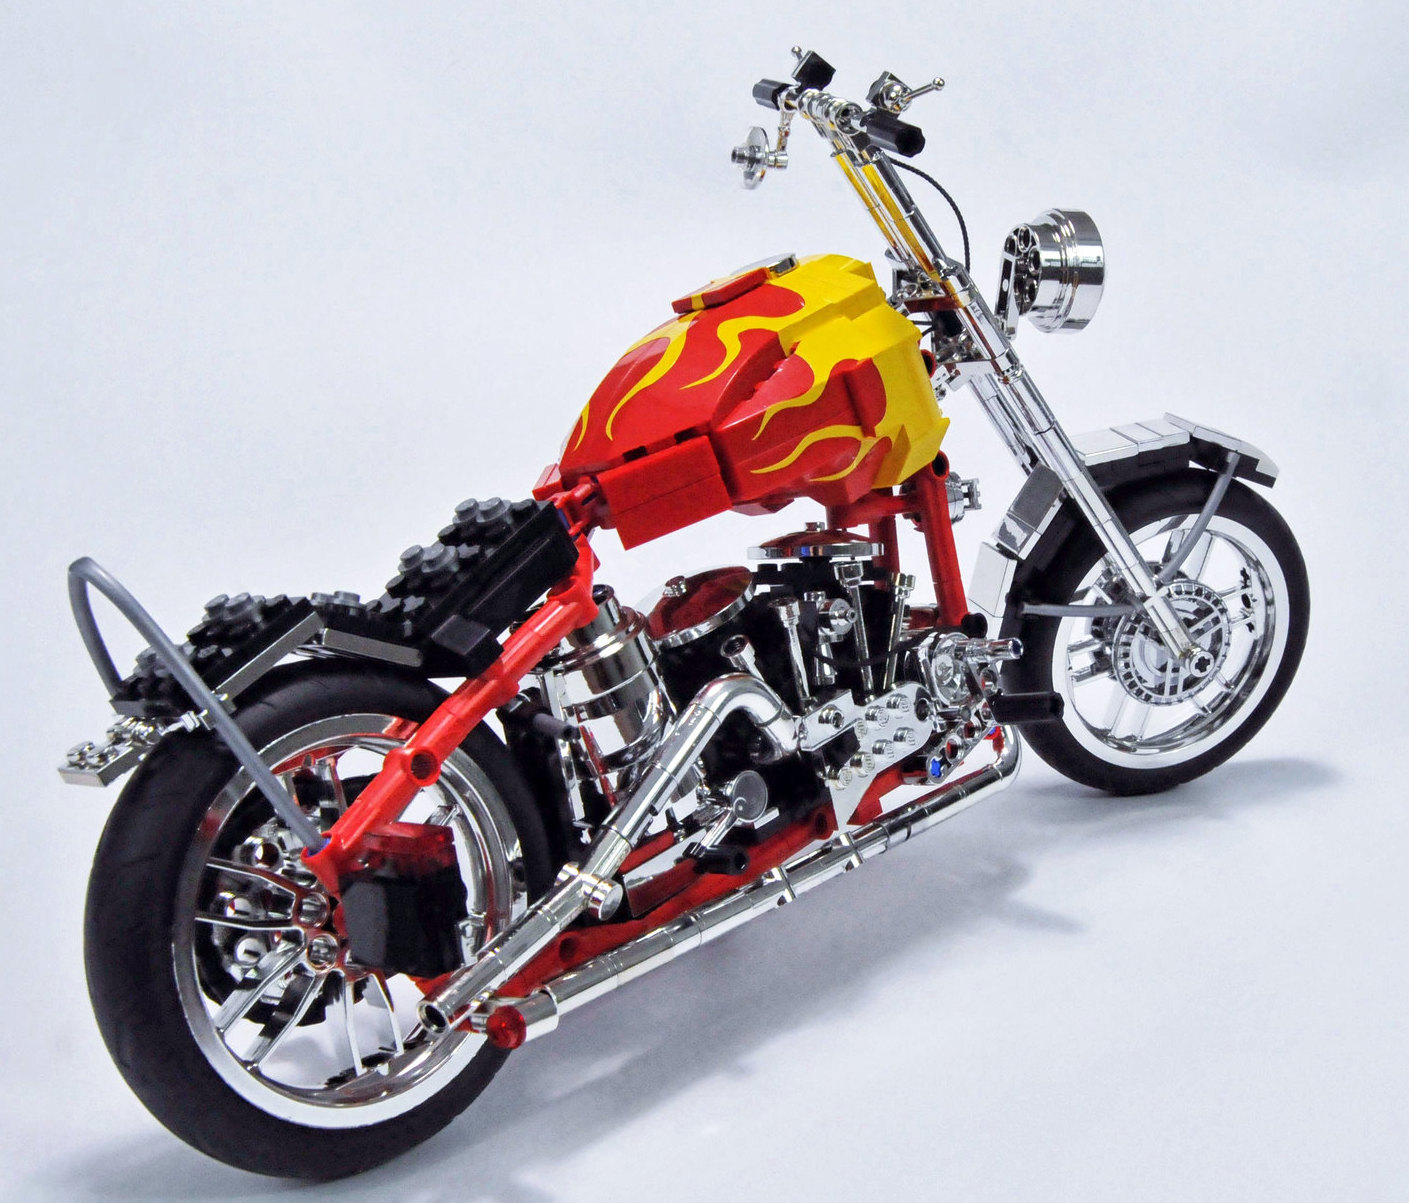 Image of very realistic LEGO built motorcycle